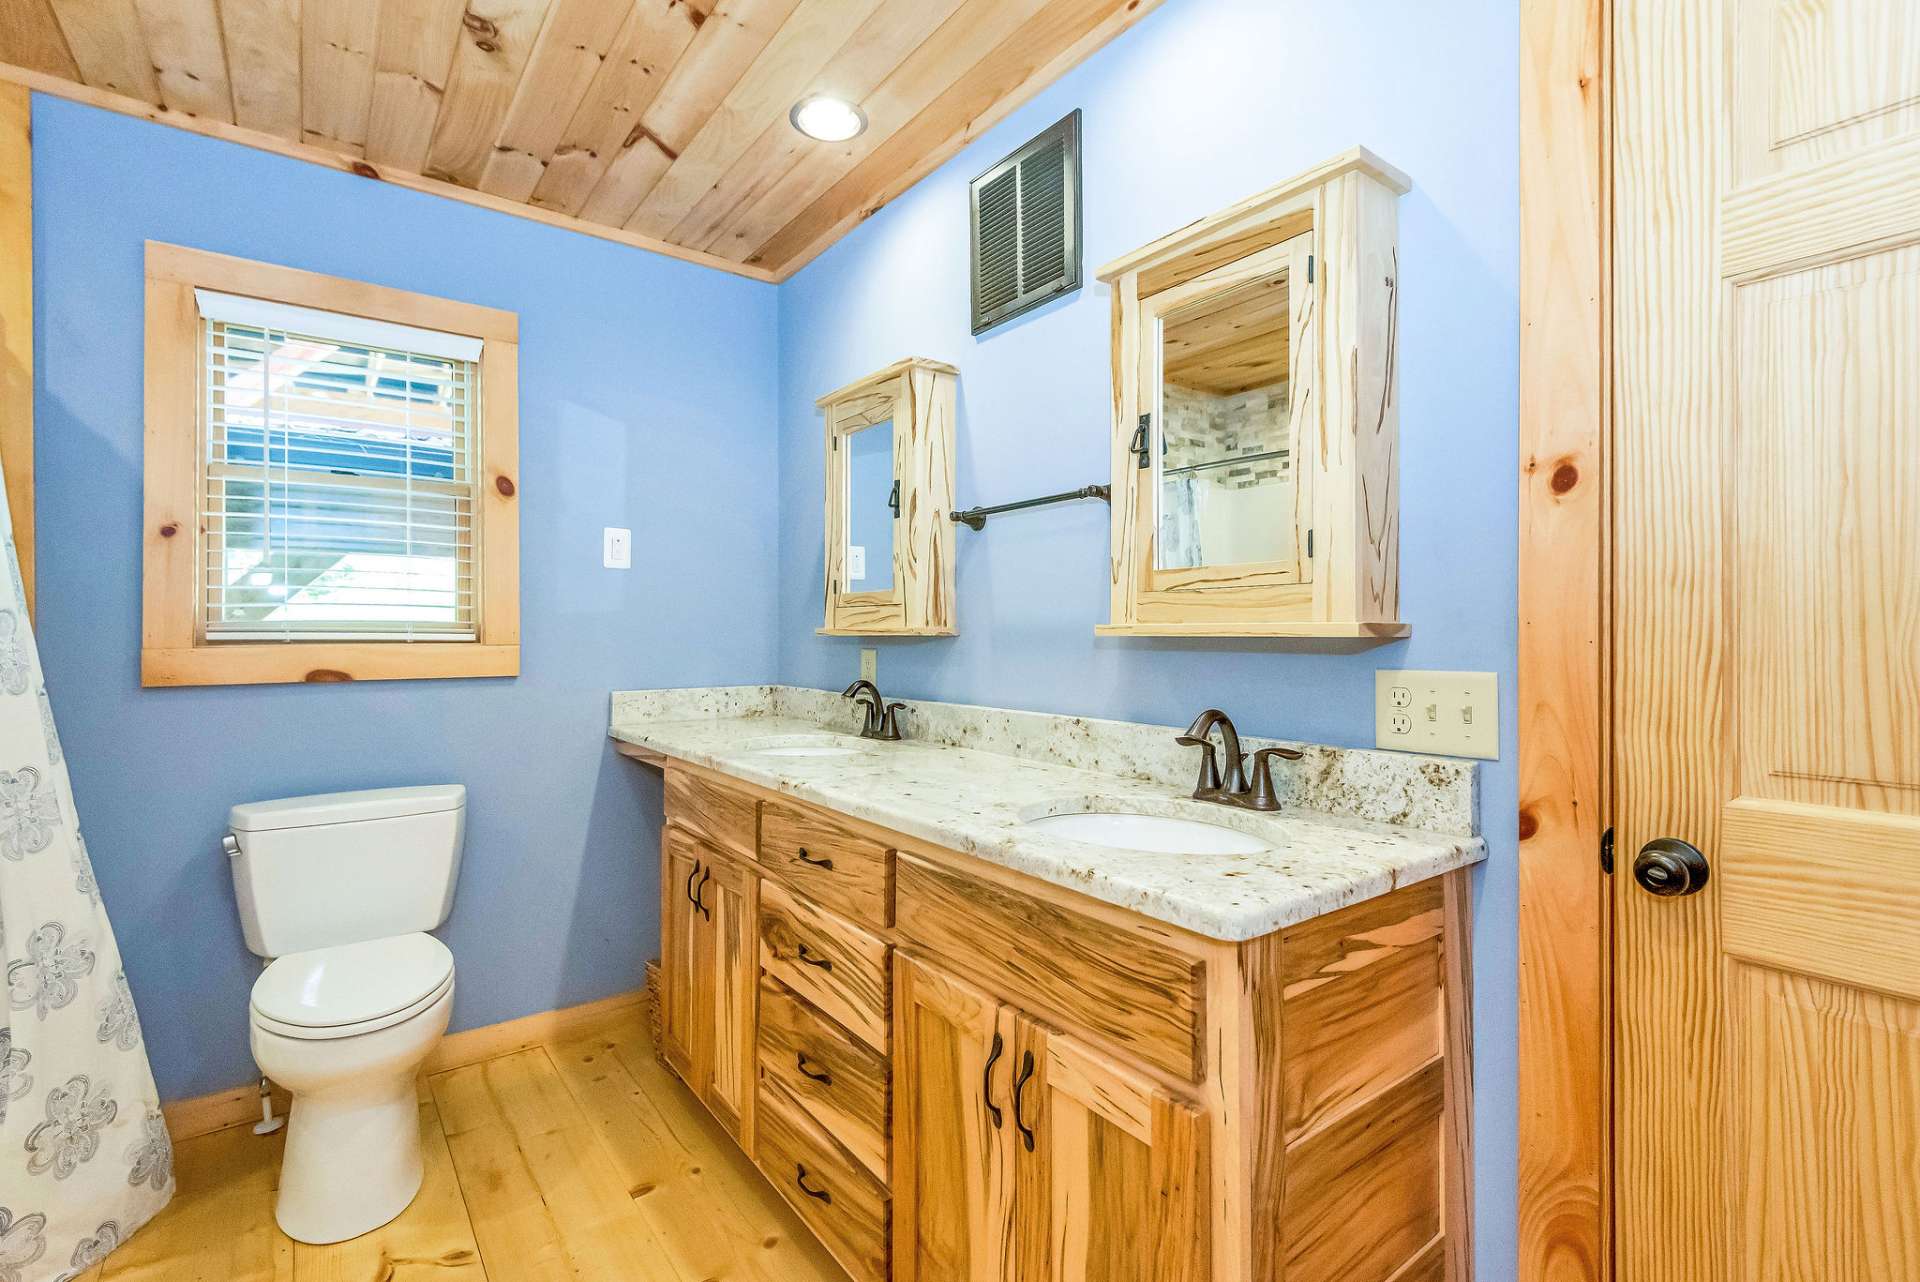 The main level bath vanity features granite countertops with double sinks.